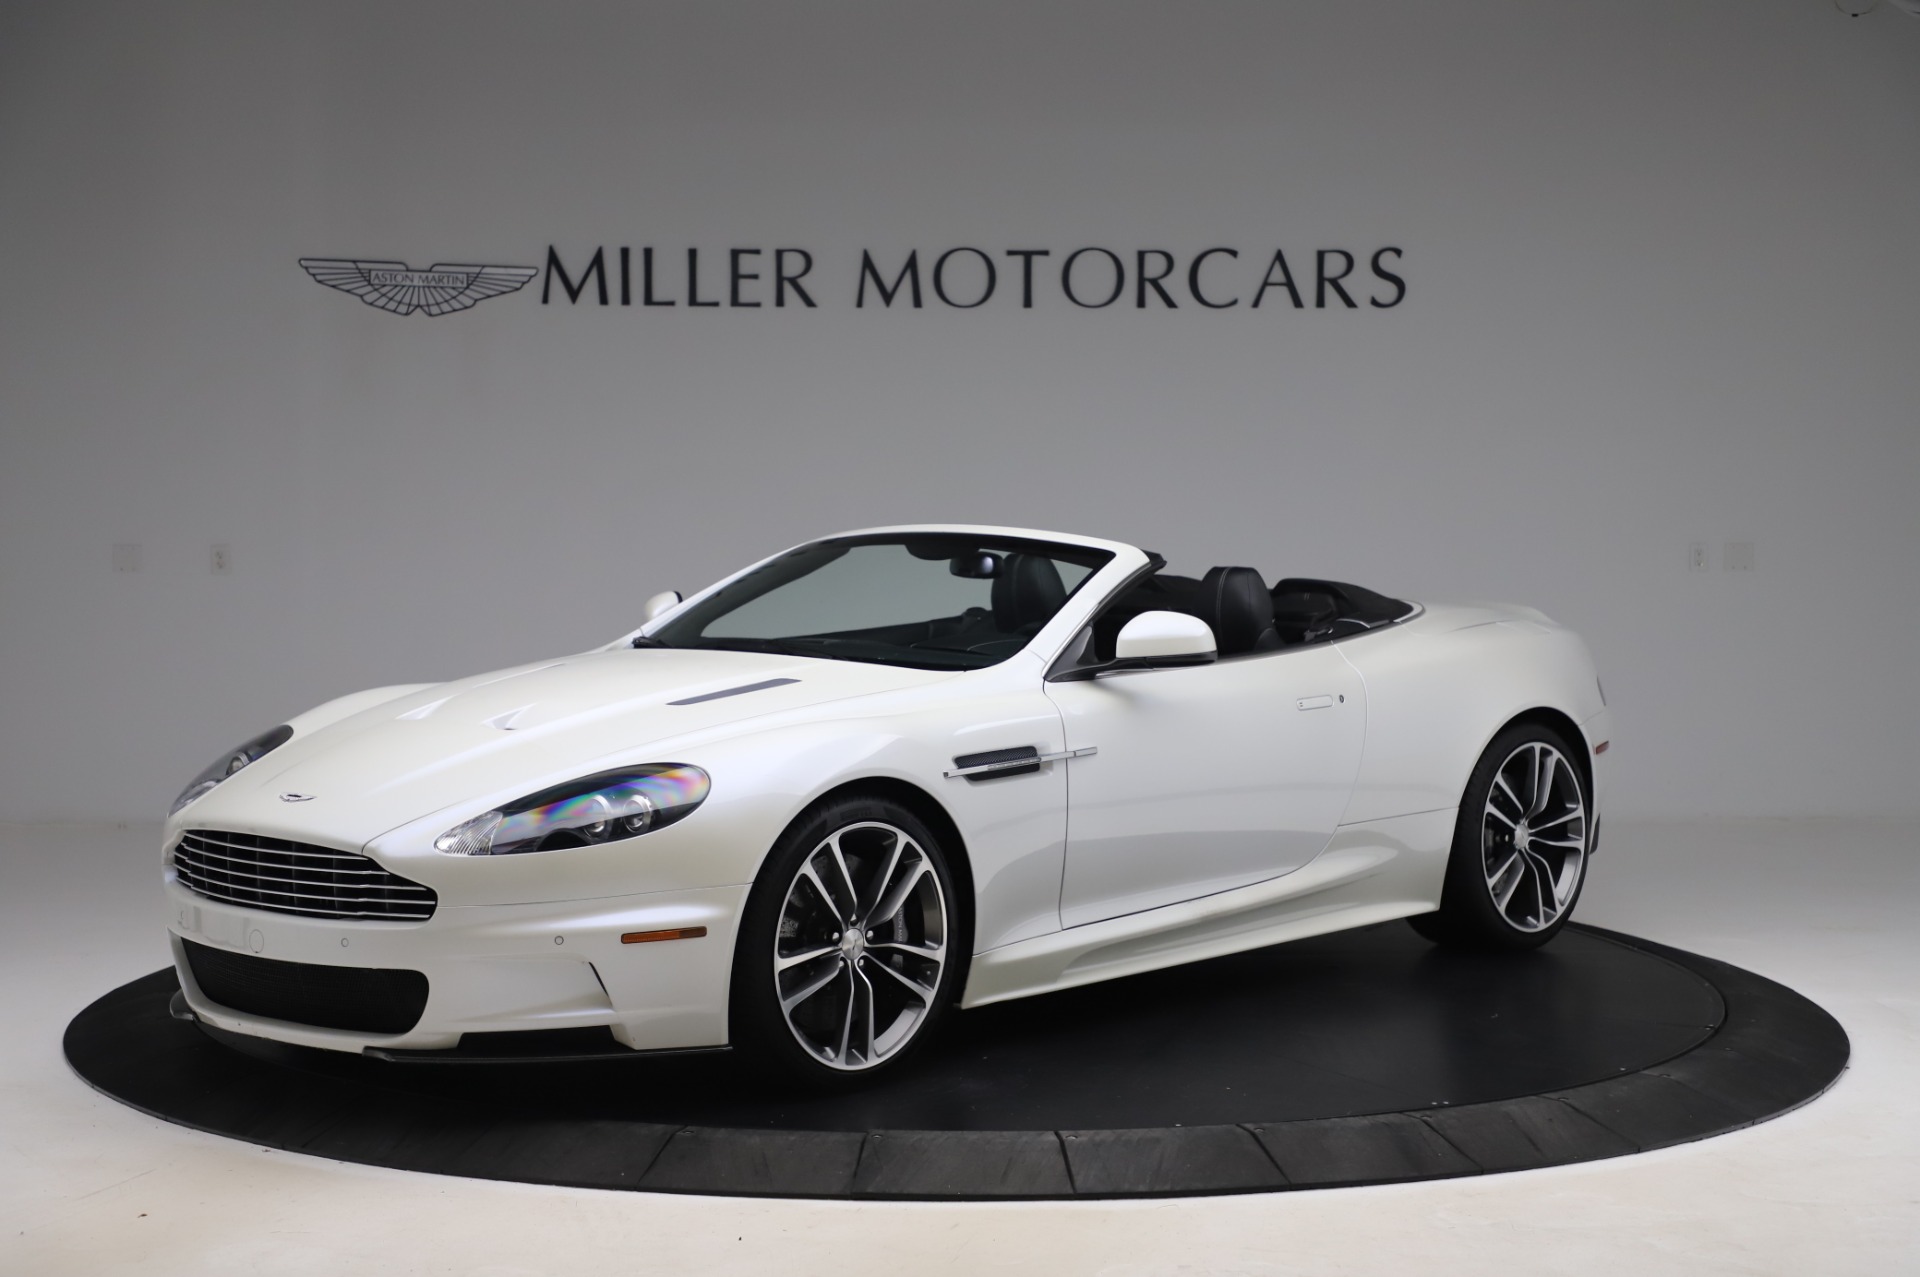 Used 2010 Aston Martin DBS Volante for sale Sold at Aston Martin of Greenwich in Greenwich CT 06830 1